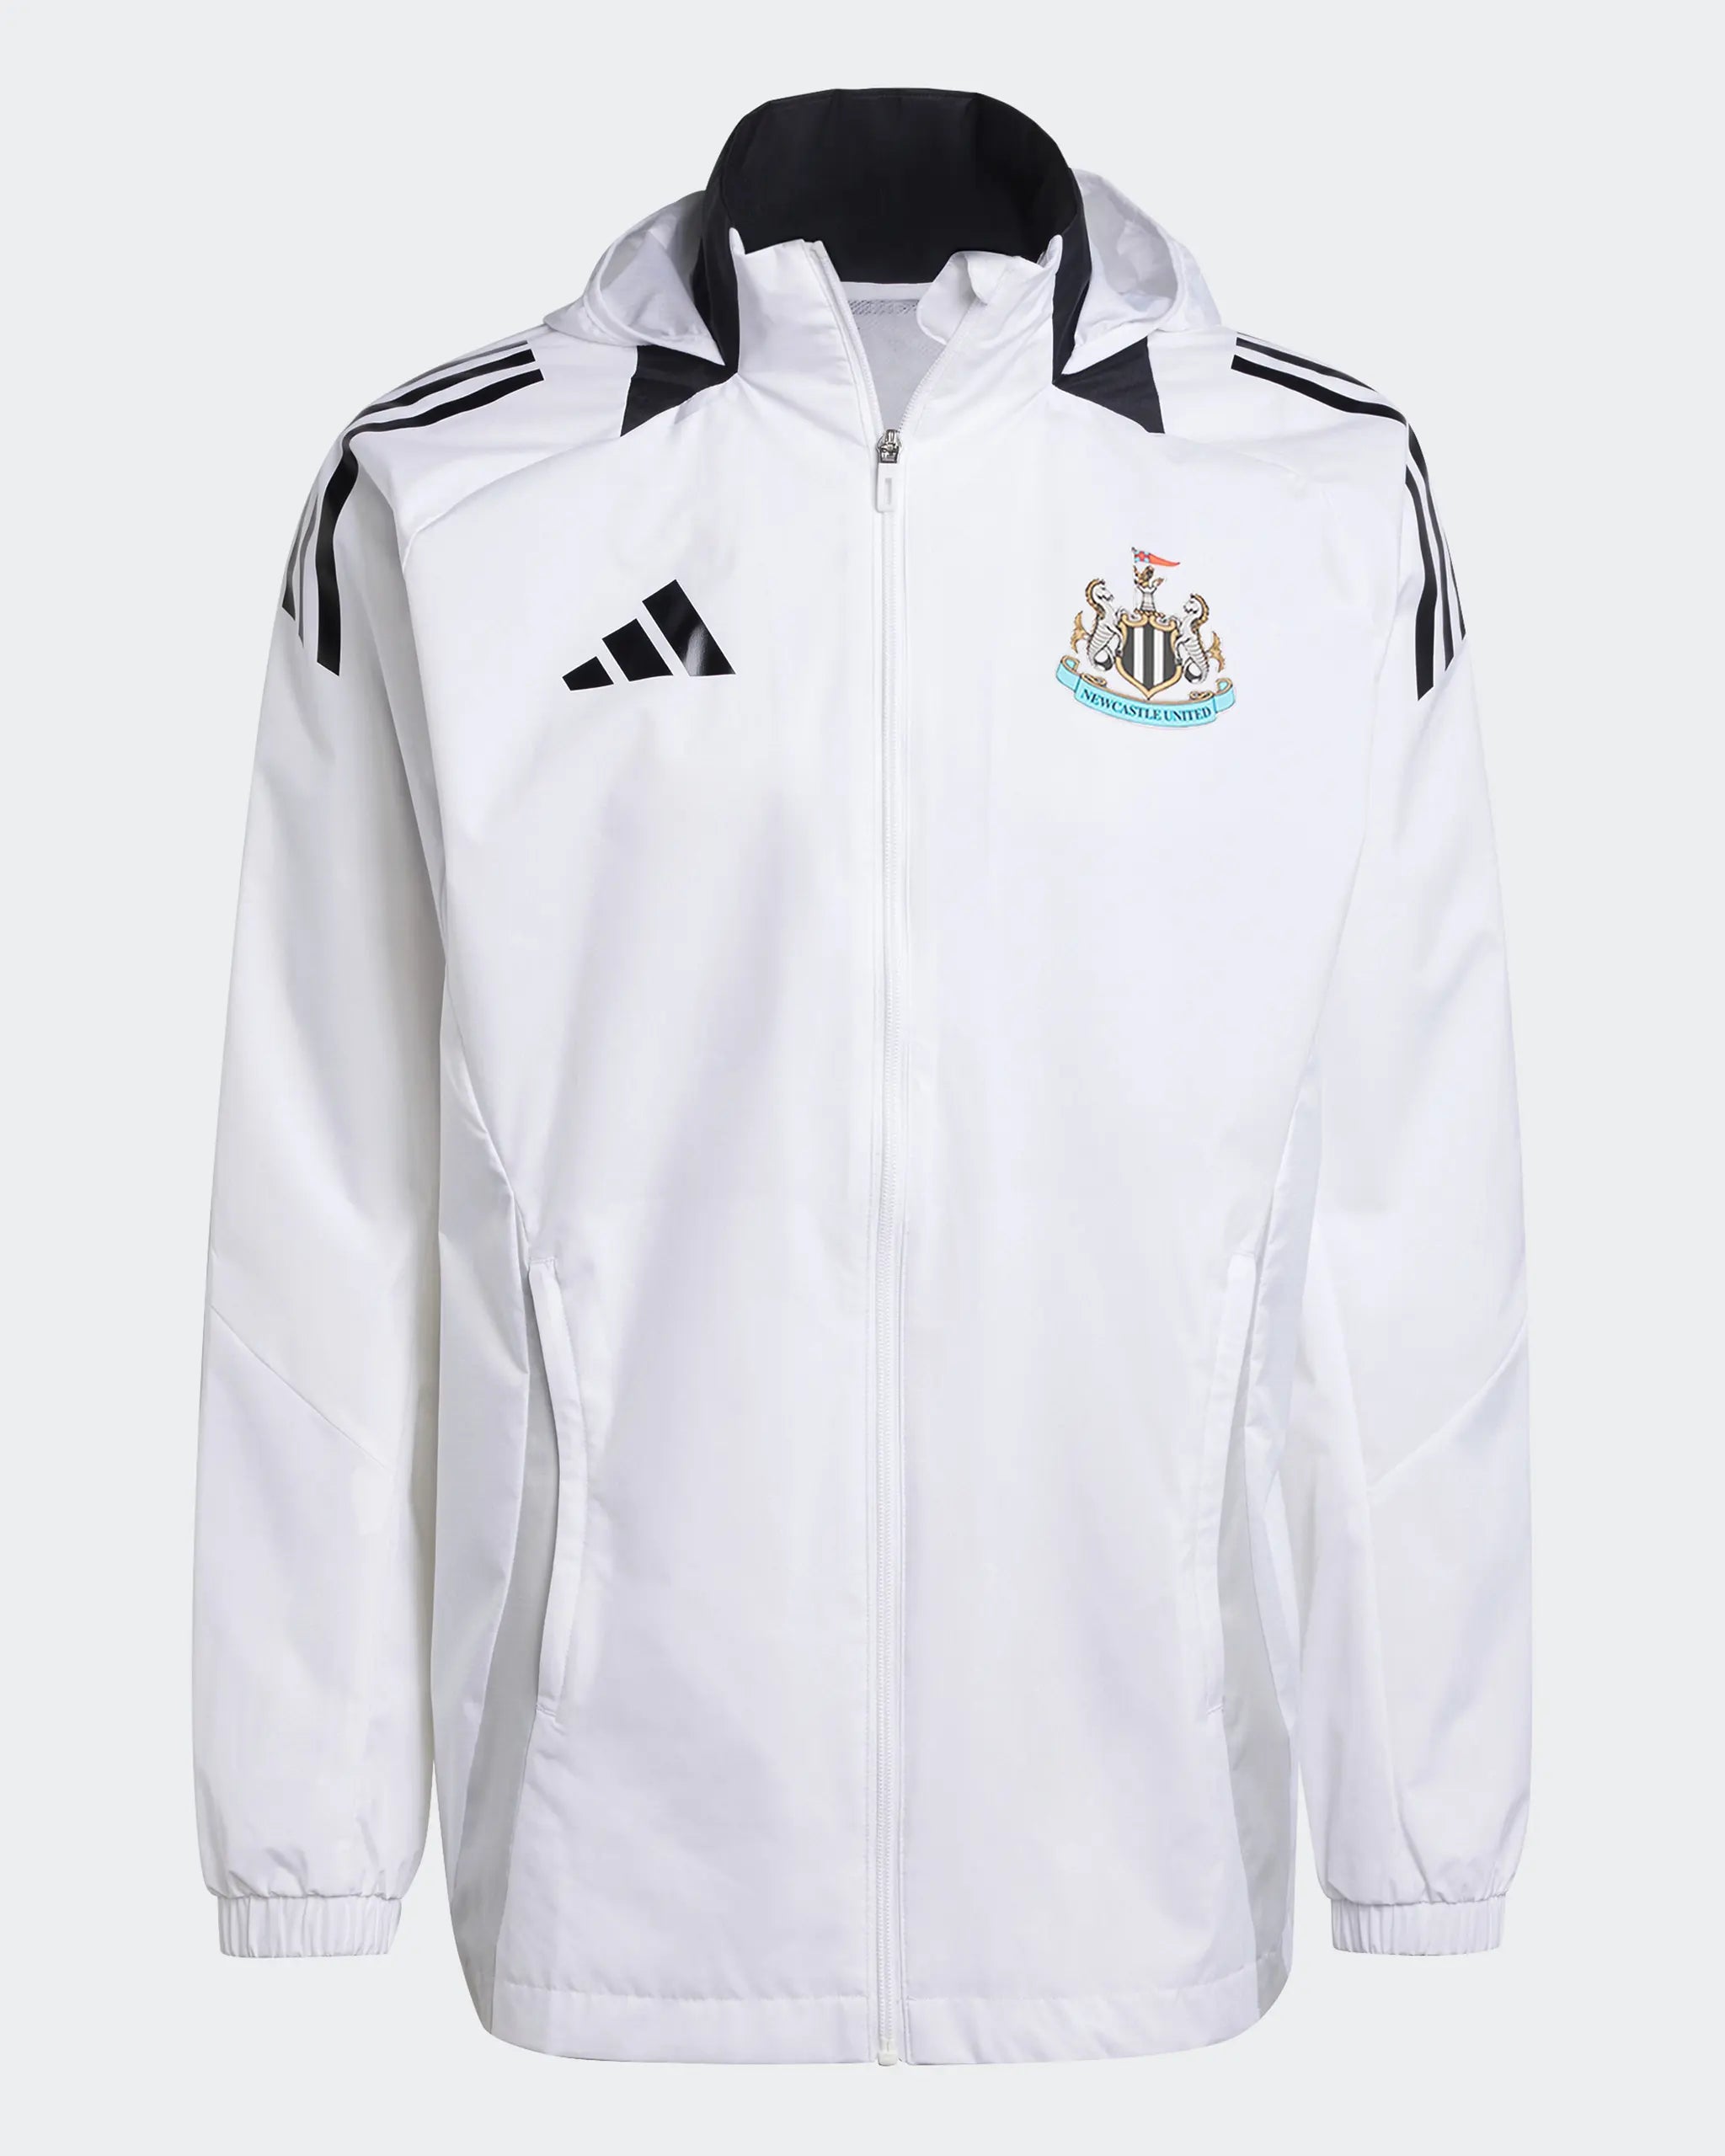 Newcastle United adidas Kids' Coach's Competition All Weather Jacket